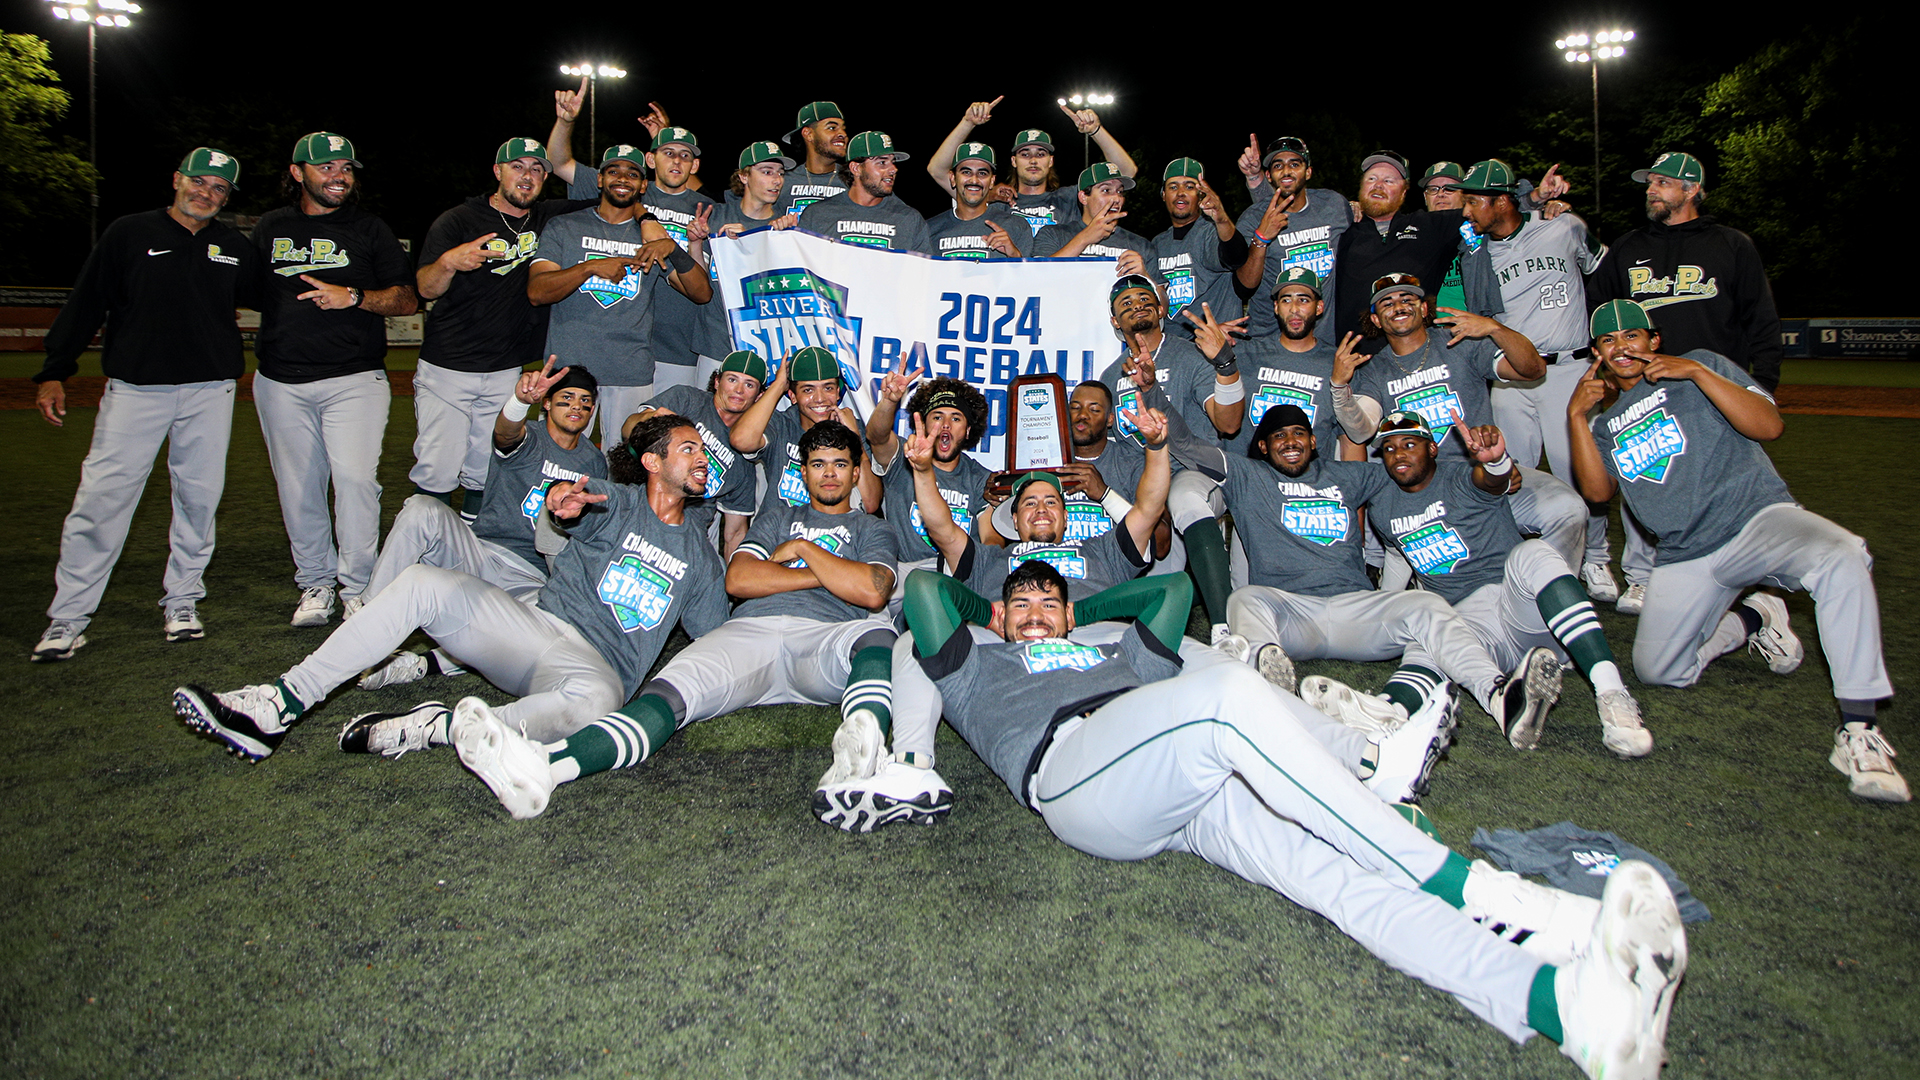 Point Park won their second straight RSC Baseball Championship after going 3-0 on championship Sunday.